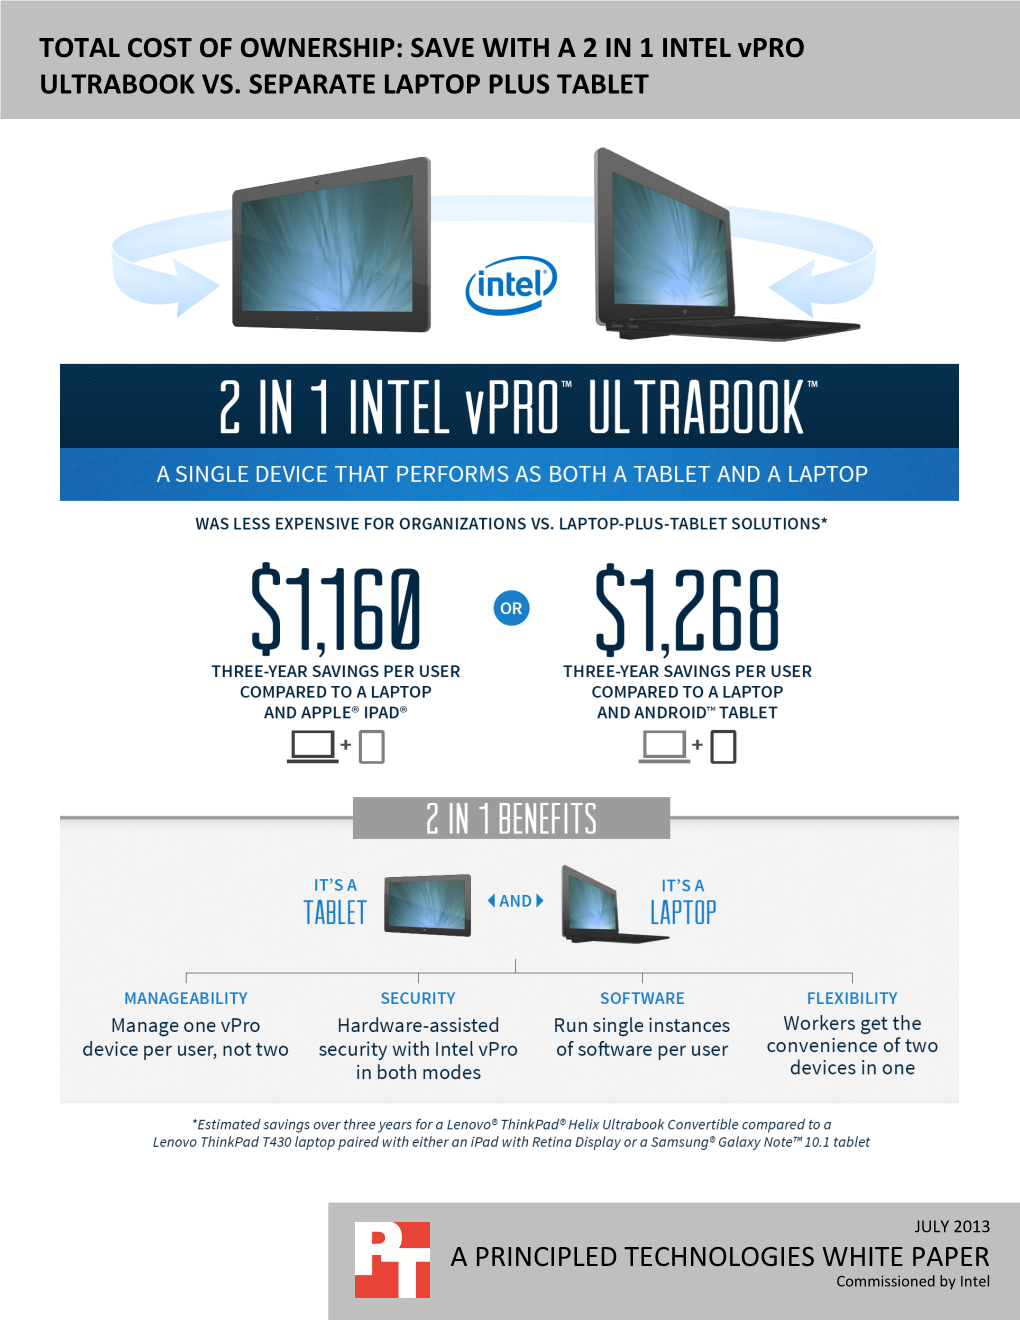 SAVE with a 2 in 1 INTEL Vpro ULTRABOOK VS